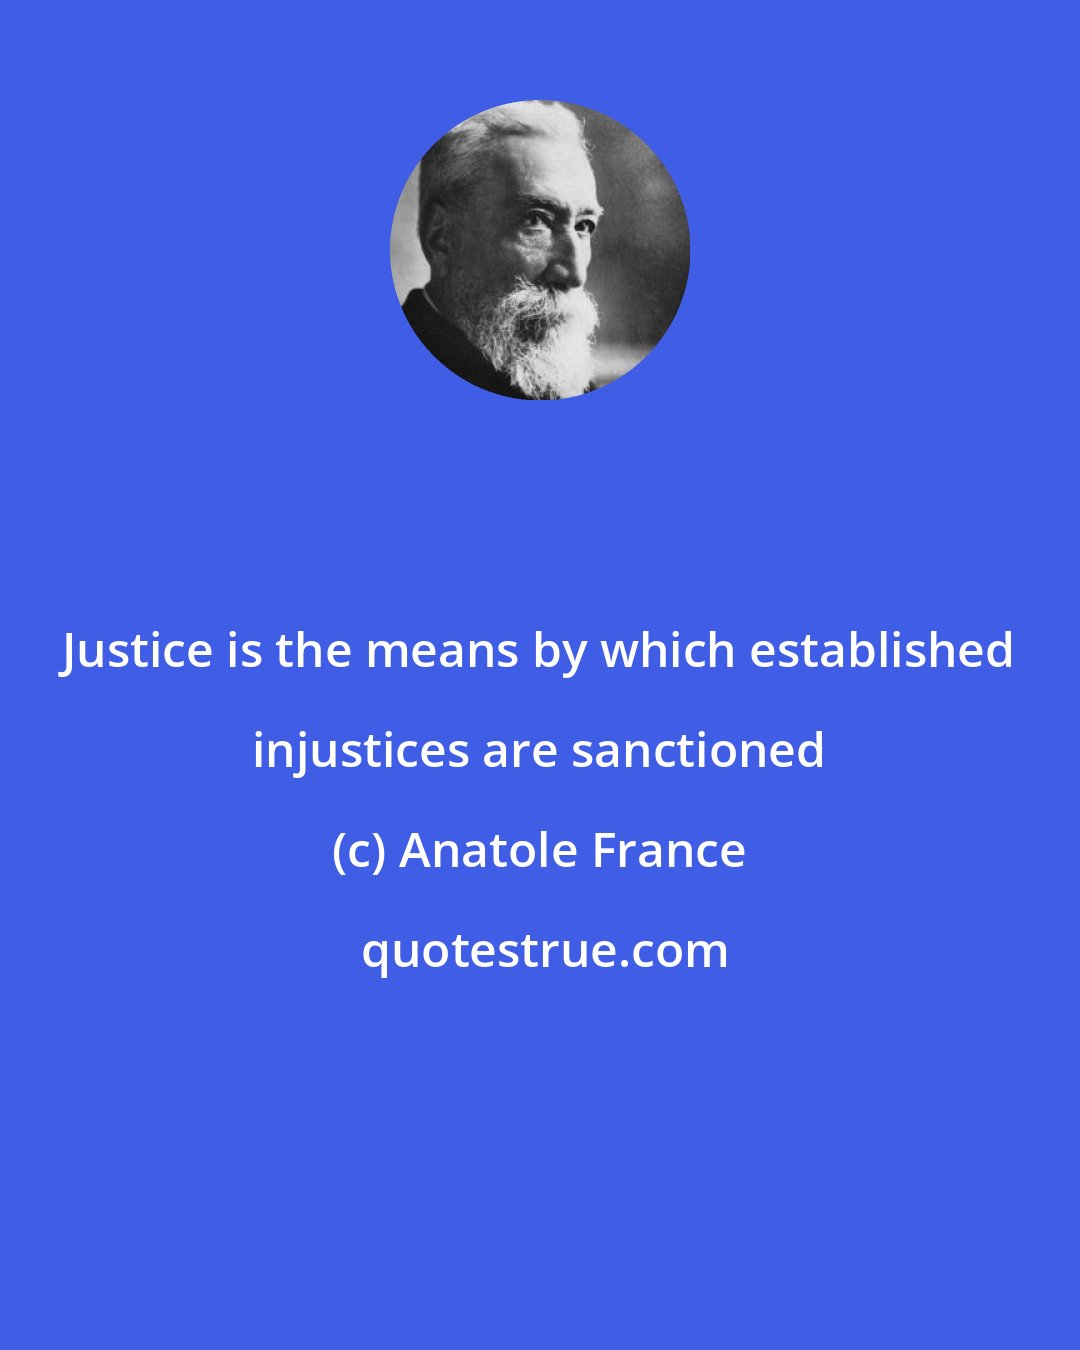 Anatole France: Justice is the means by which established injustices are sanctioned